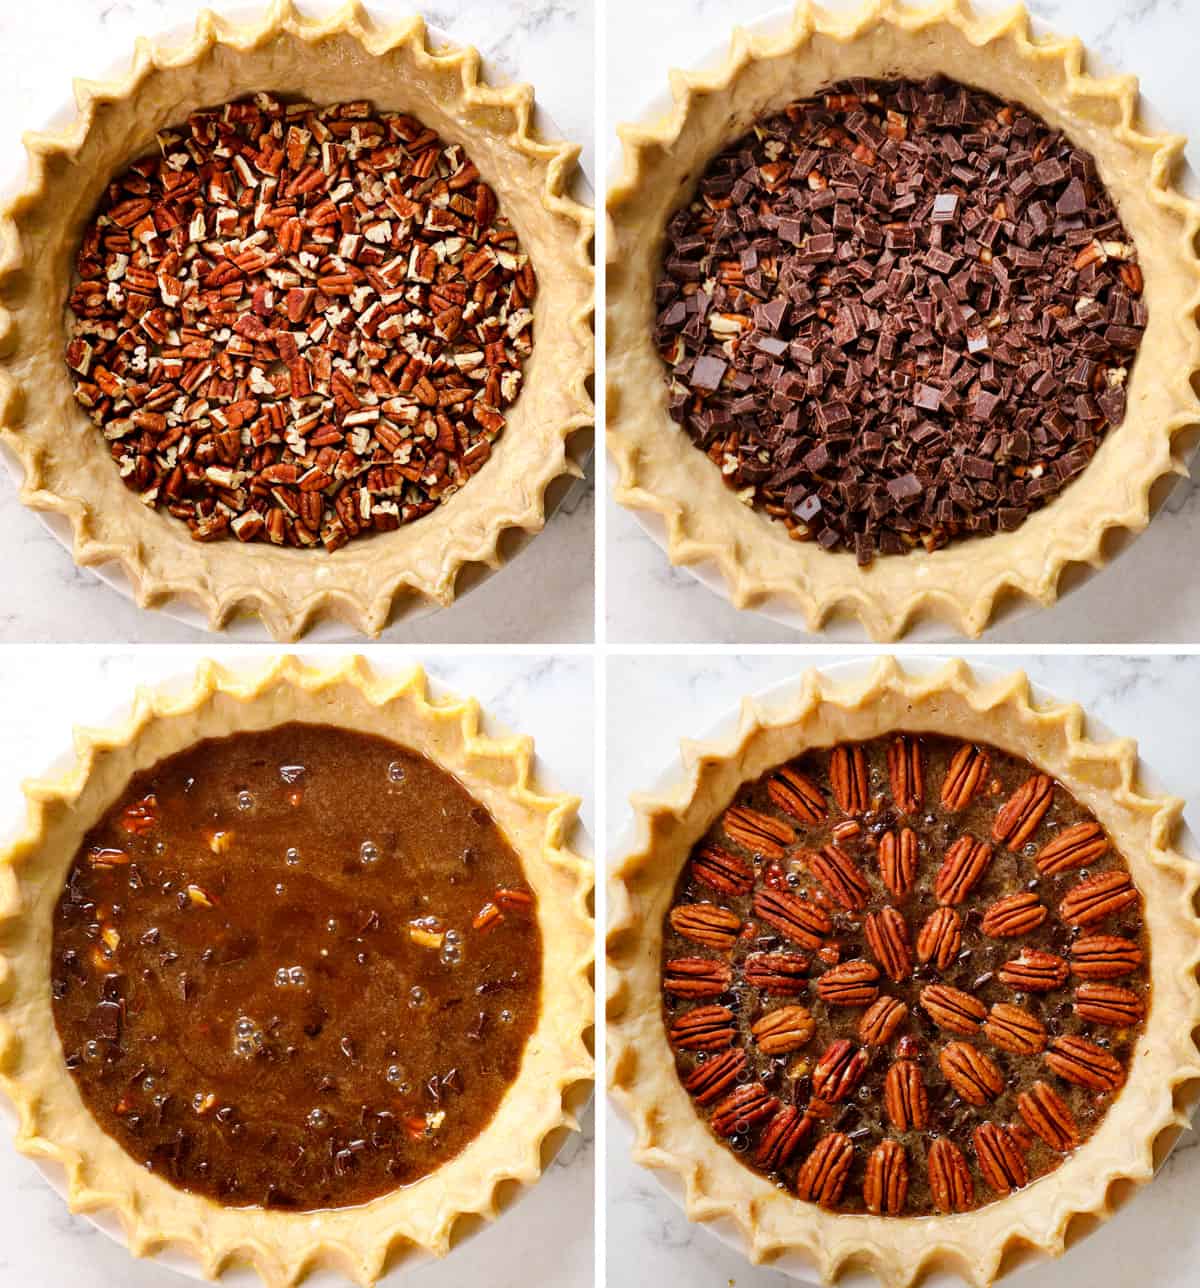 a collage showing how to make chocolate pecan pie by 1) adding pecans, 2) adding chocolate, 3) adding filling, 4) adding whole pecans